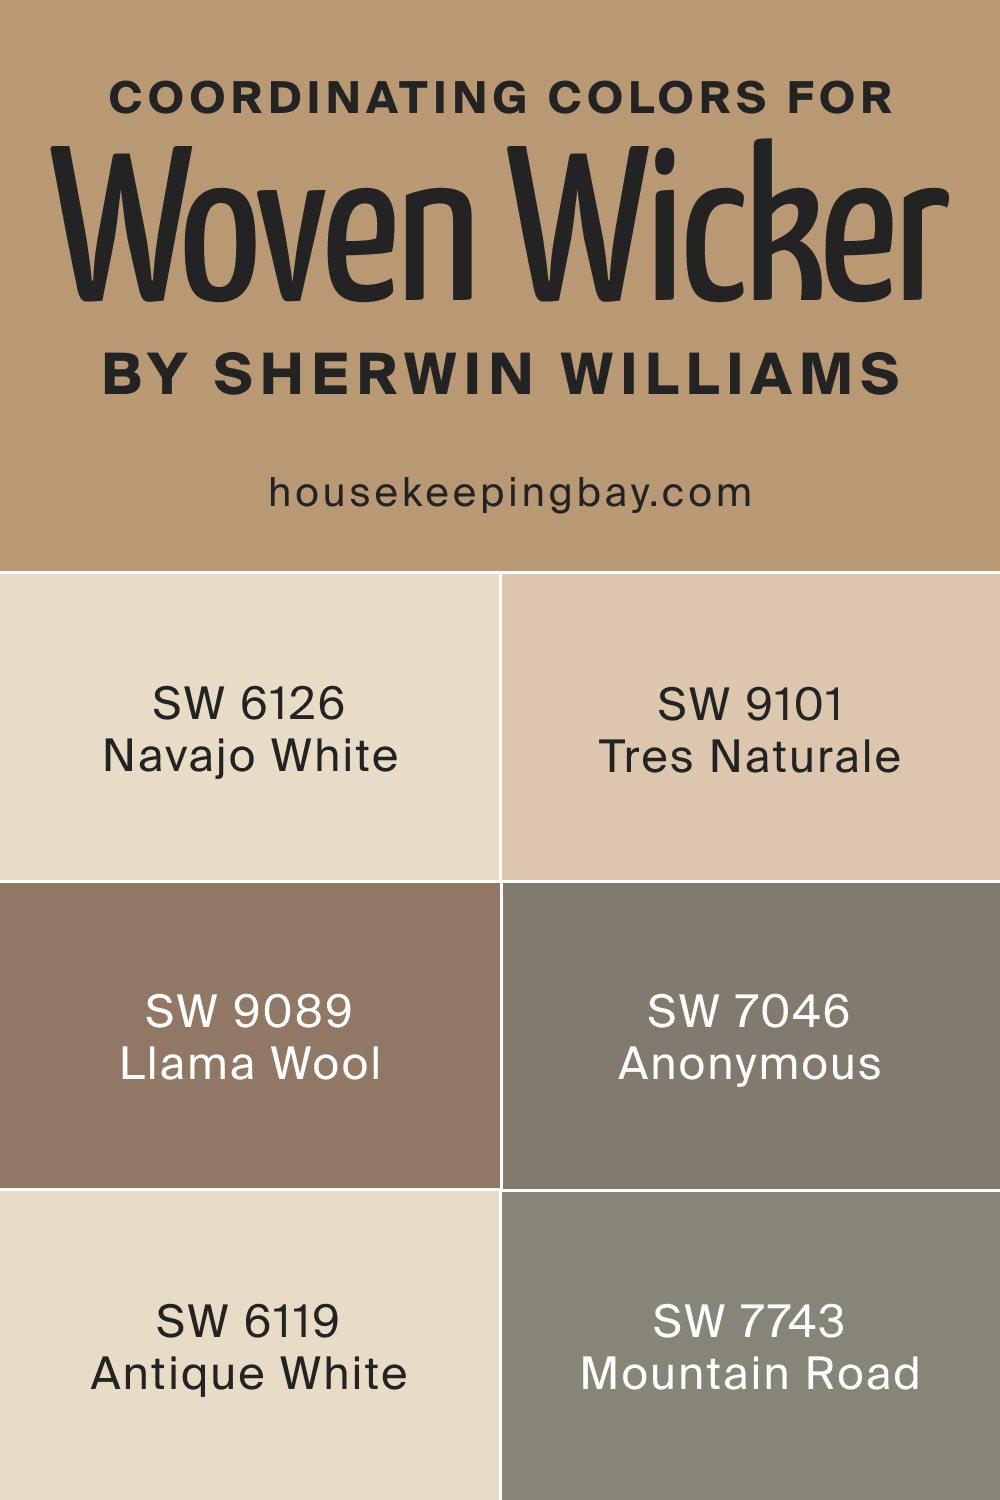 Coordinating Colors for SW 9104 Woven Wicker by Sherwin Williams